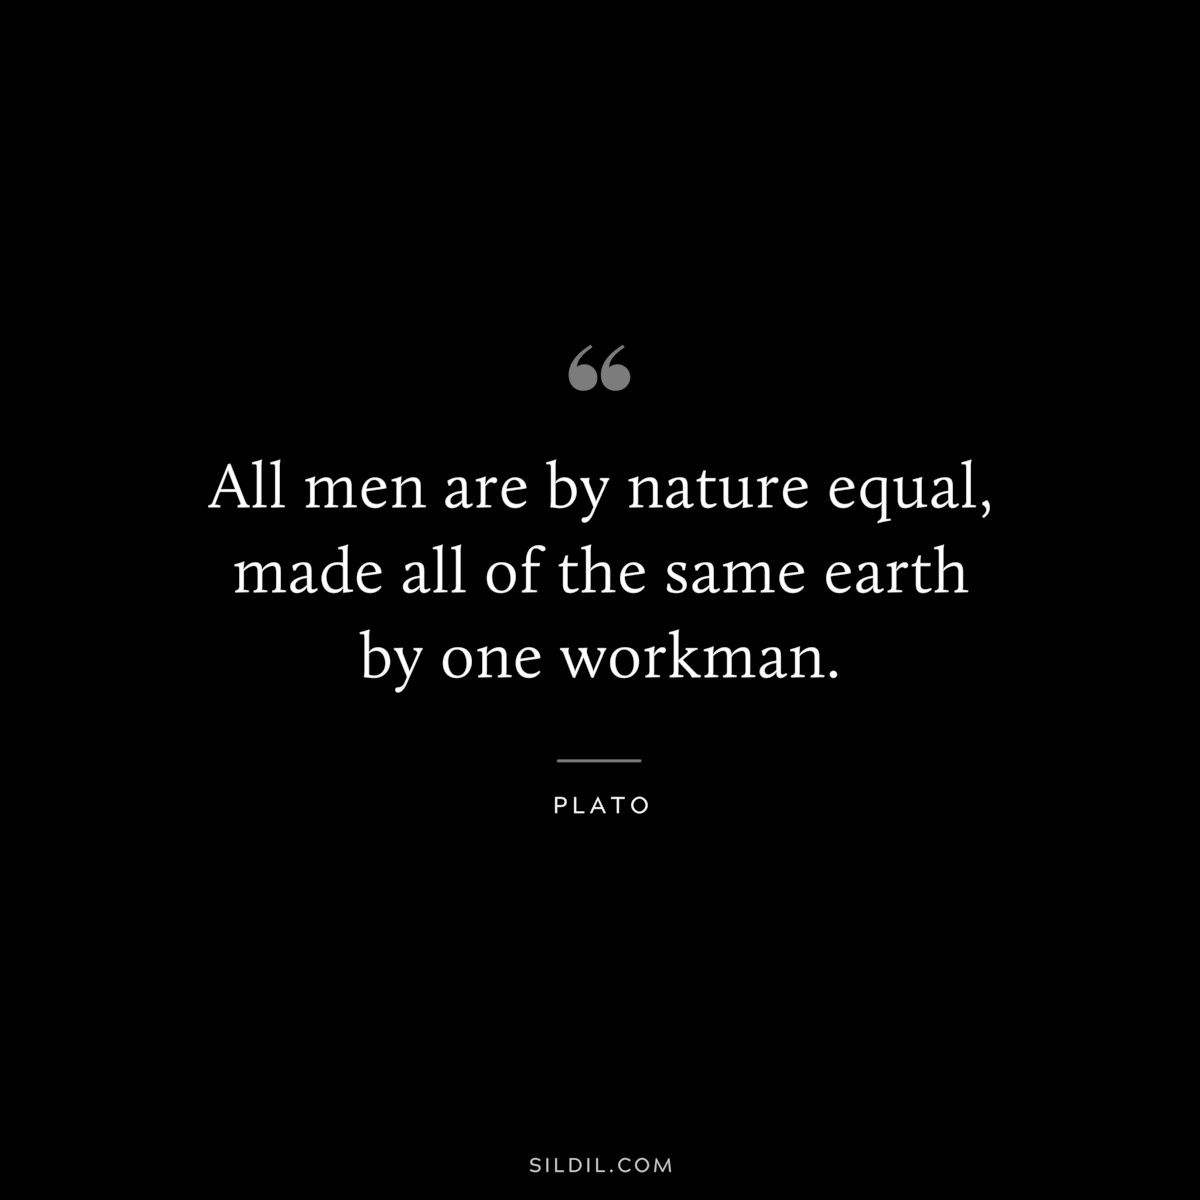 All men are by nature equal, made all of the same earth by one workman. ― Plato